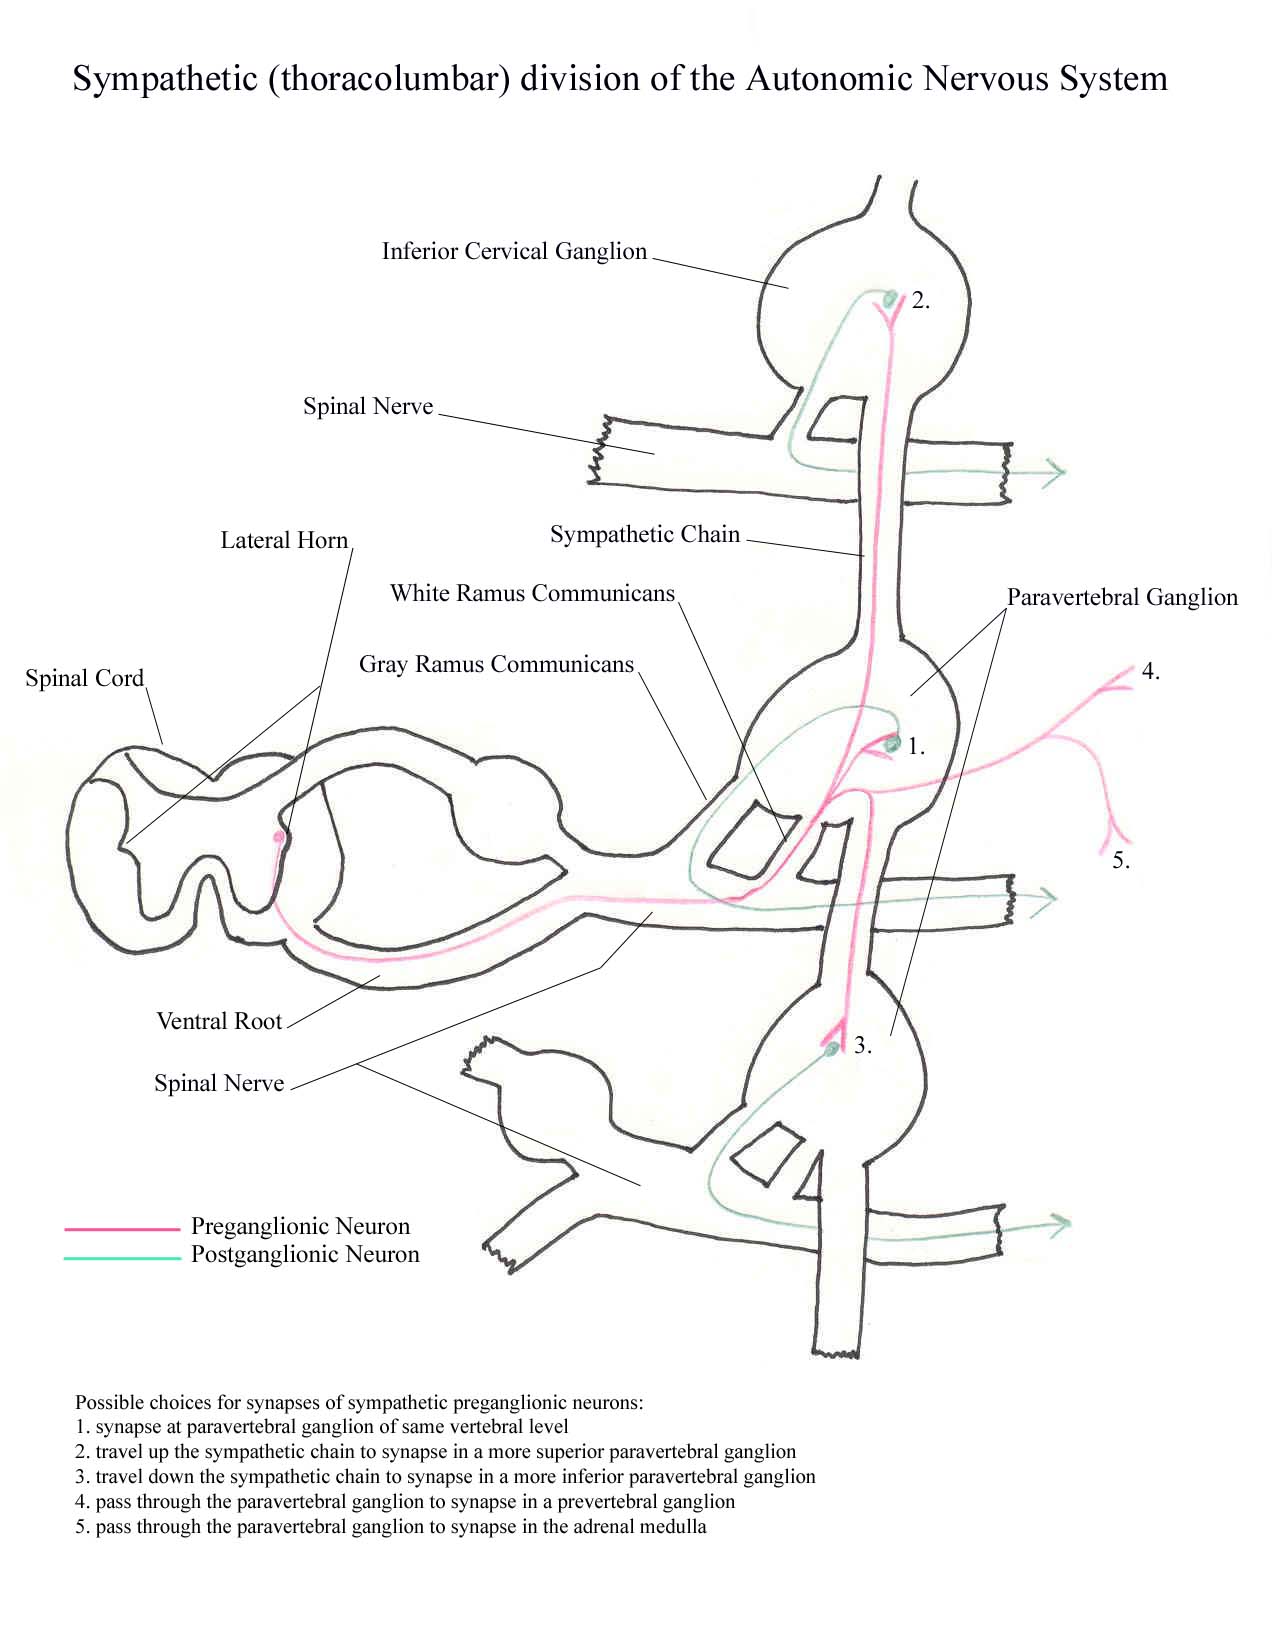 a completed diagram of teh nerve pathways in the sympathetic chain